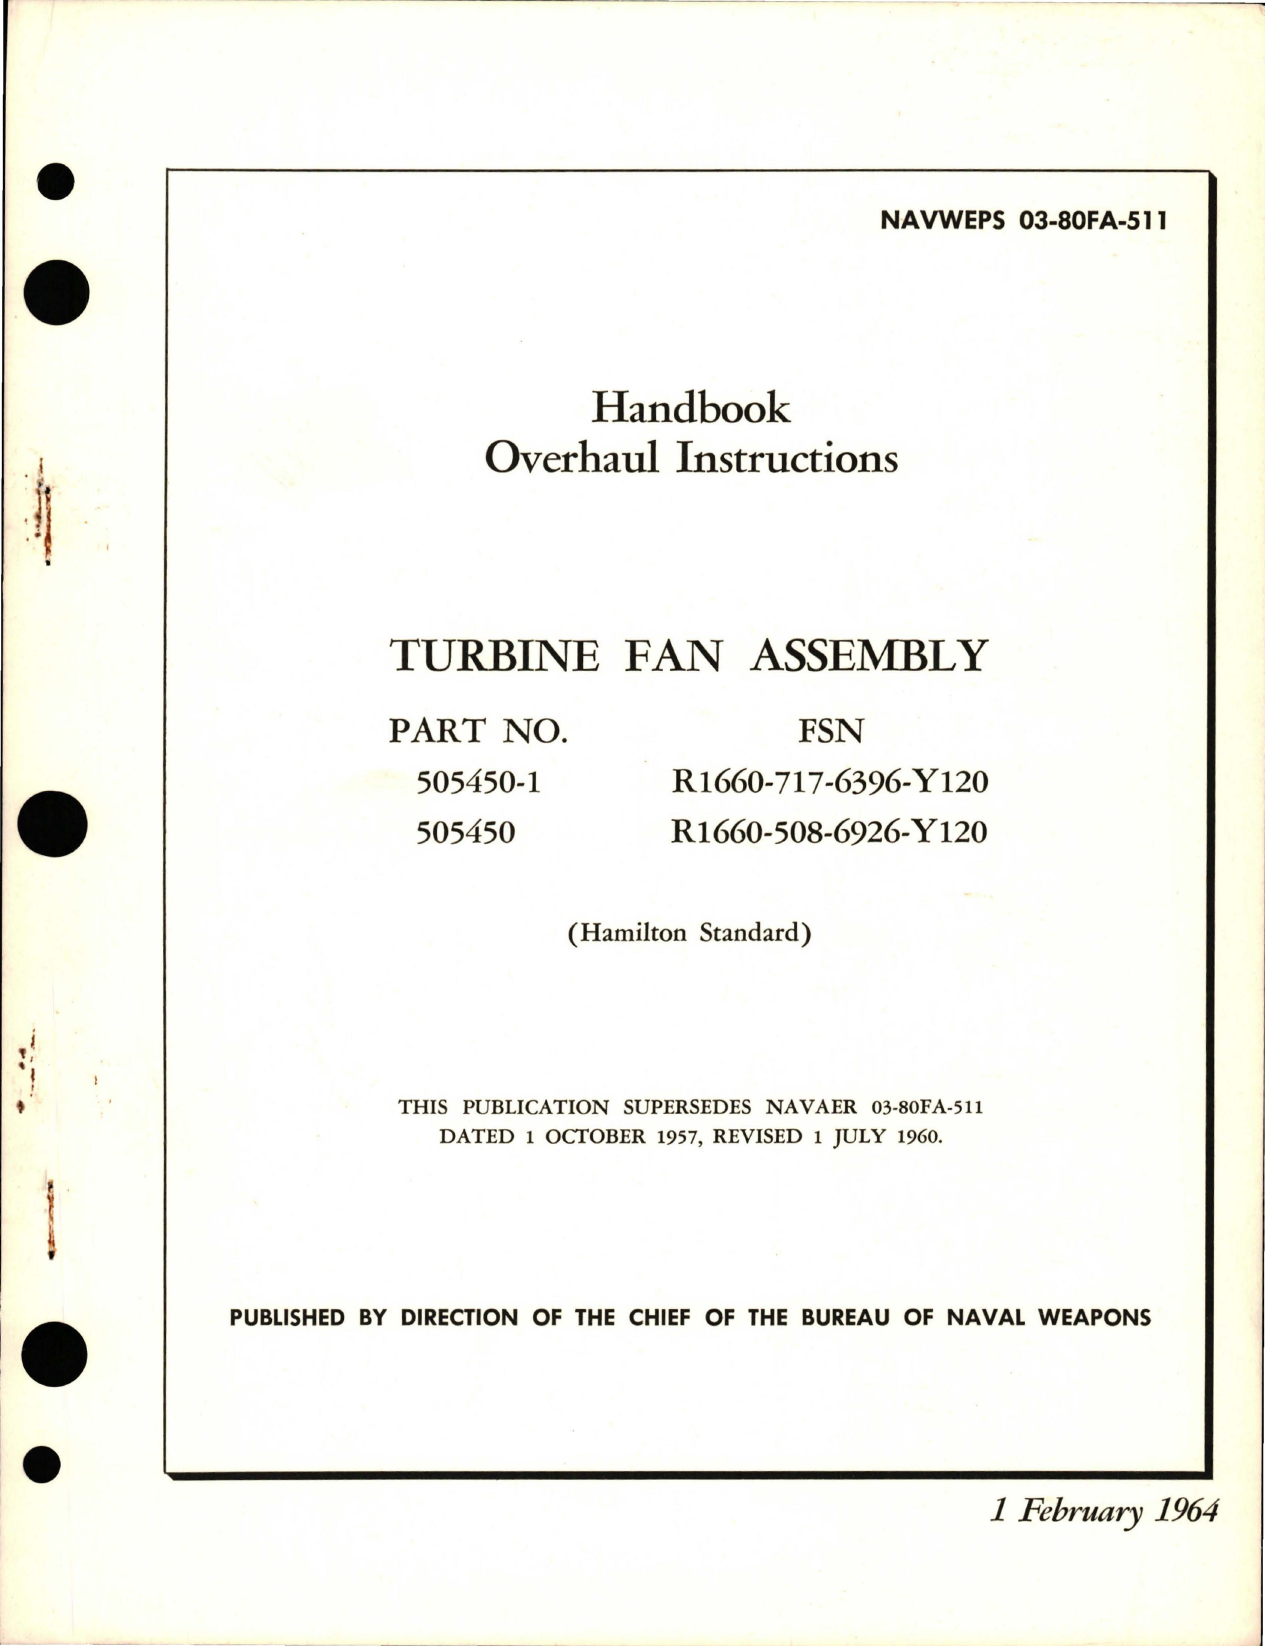 Sample page 1 from AirCorps Library document: Overhaul Instructions for Turbine Fan Assembly - Parts 505450-1 and 505450 